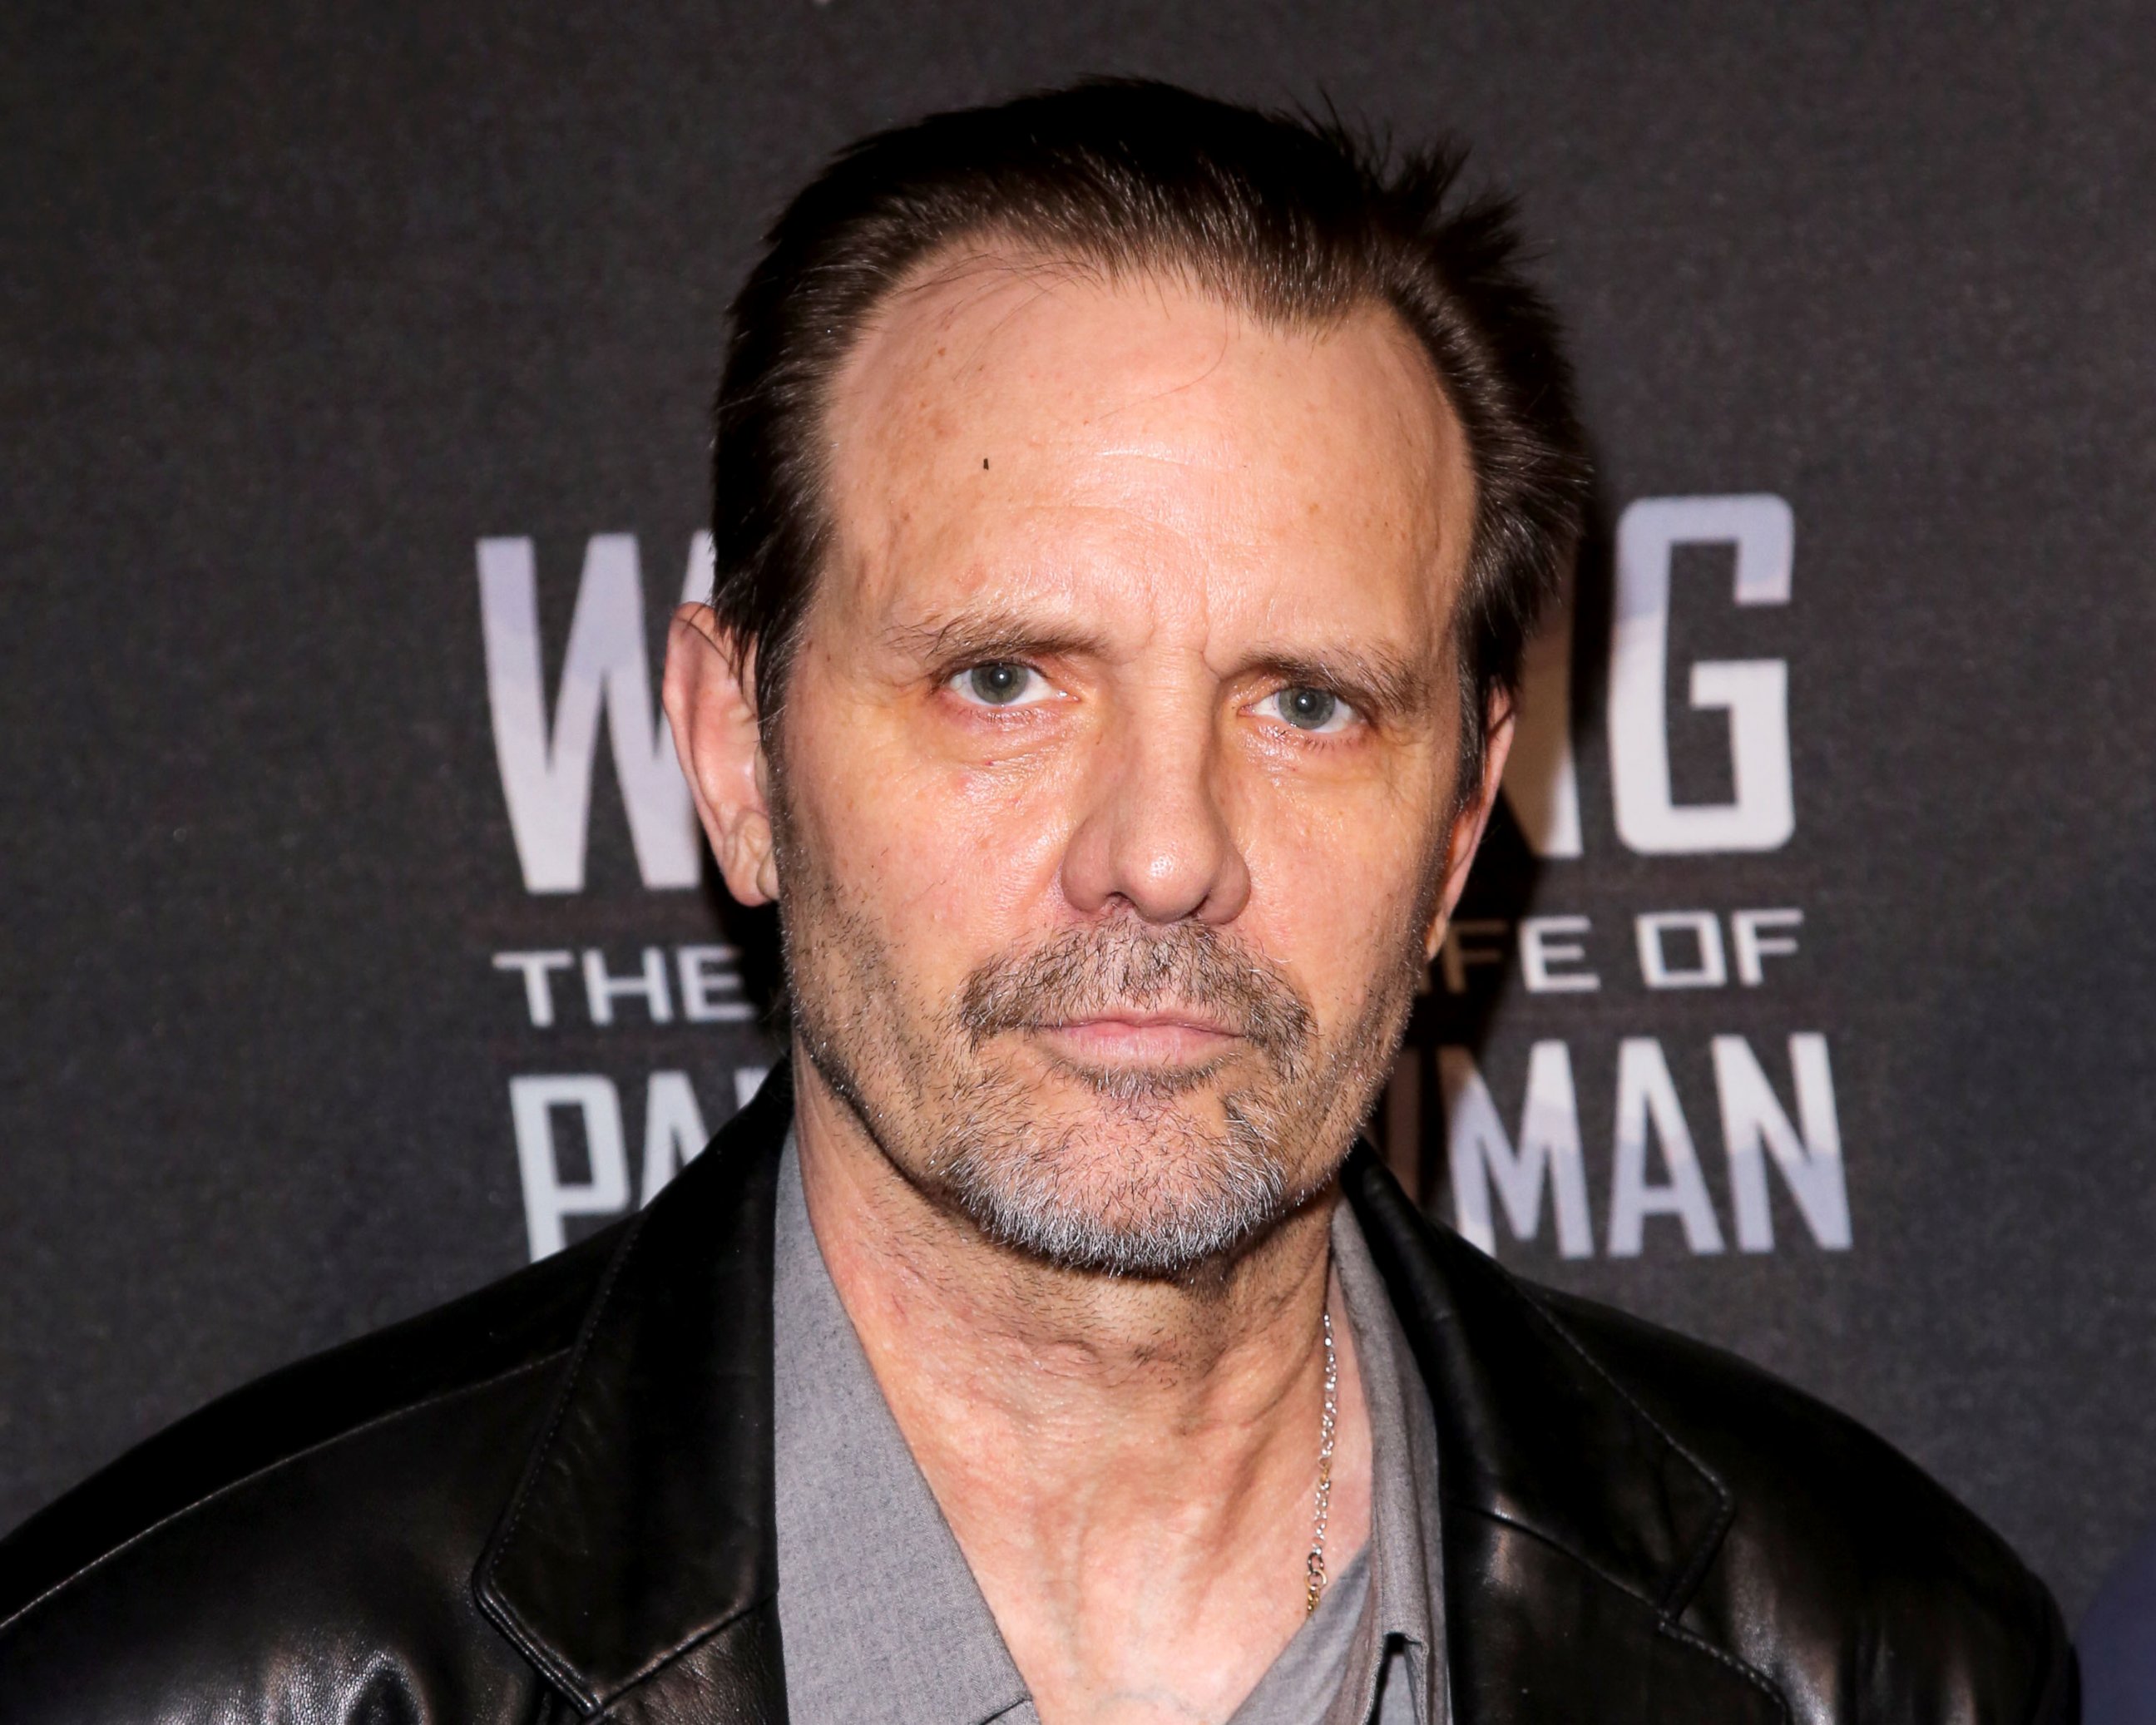 PHOTO: Michael Biehn attends the screening of "WINNING: The Racing Life Of Paul Newman" at the El Capitan Theatre, April 16, 2015, in Hollywood, Calif.